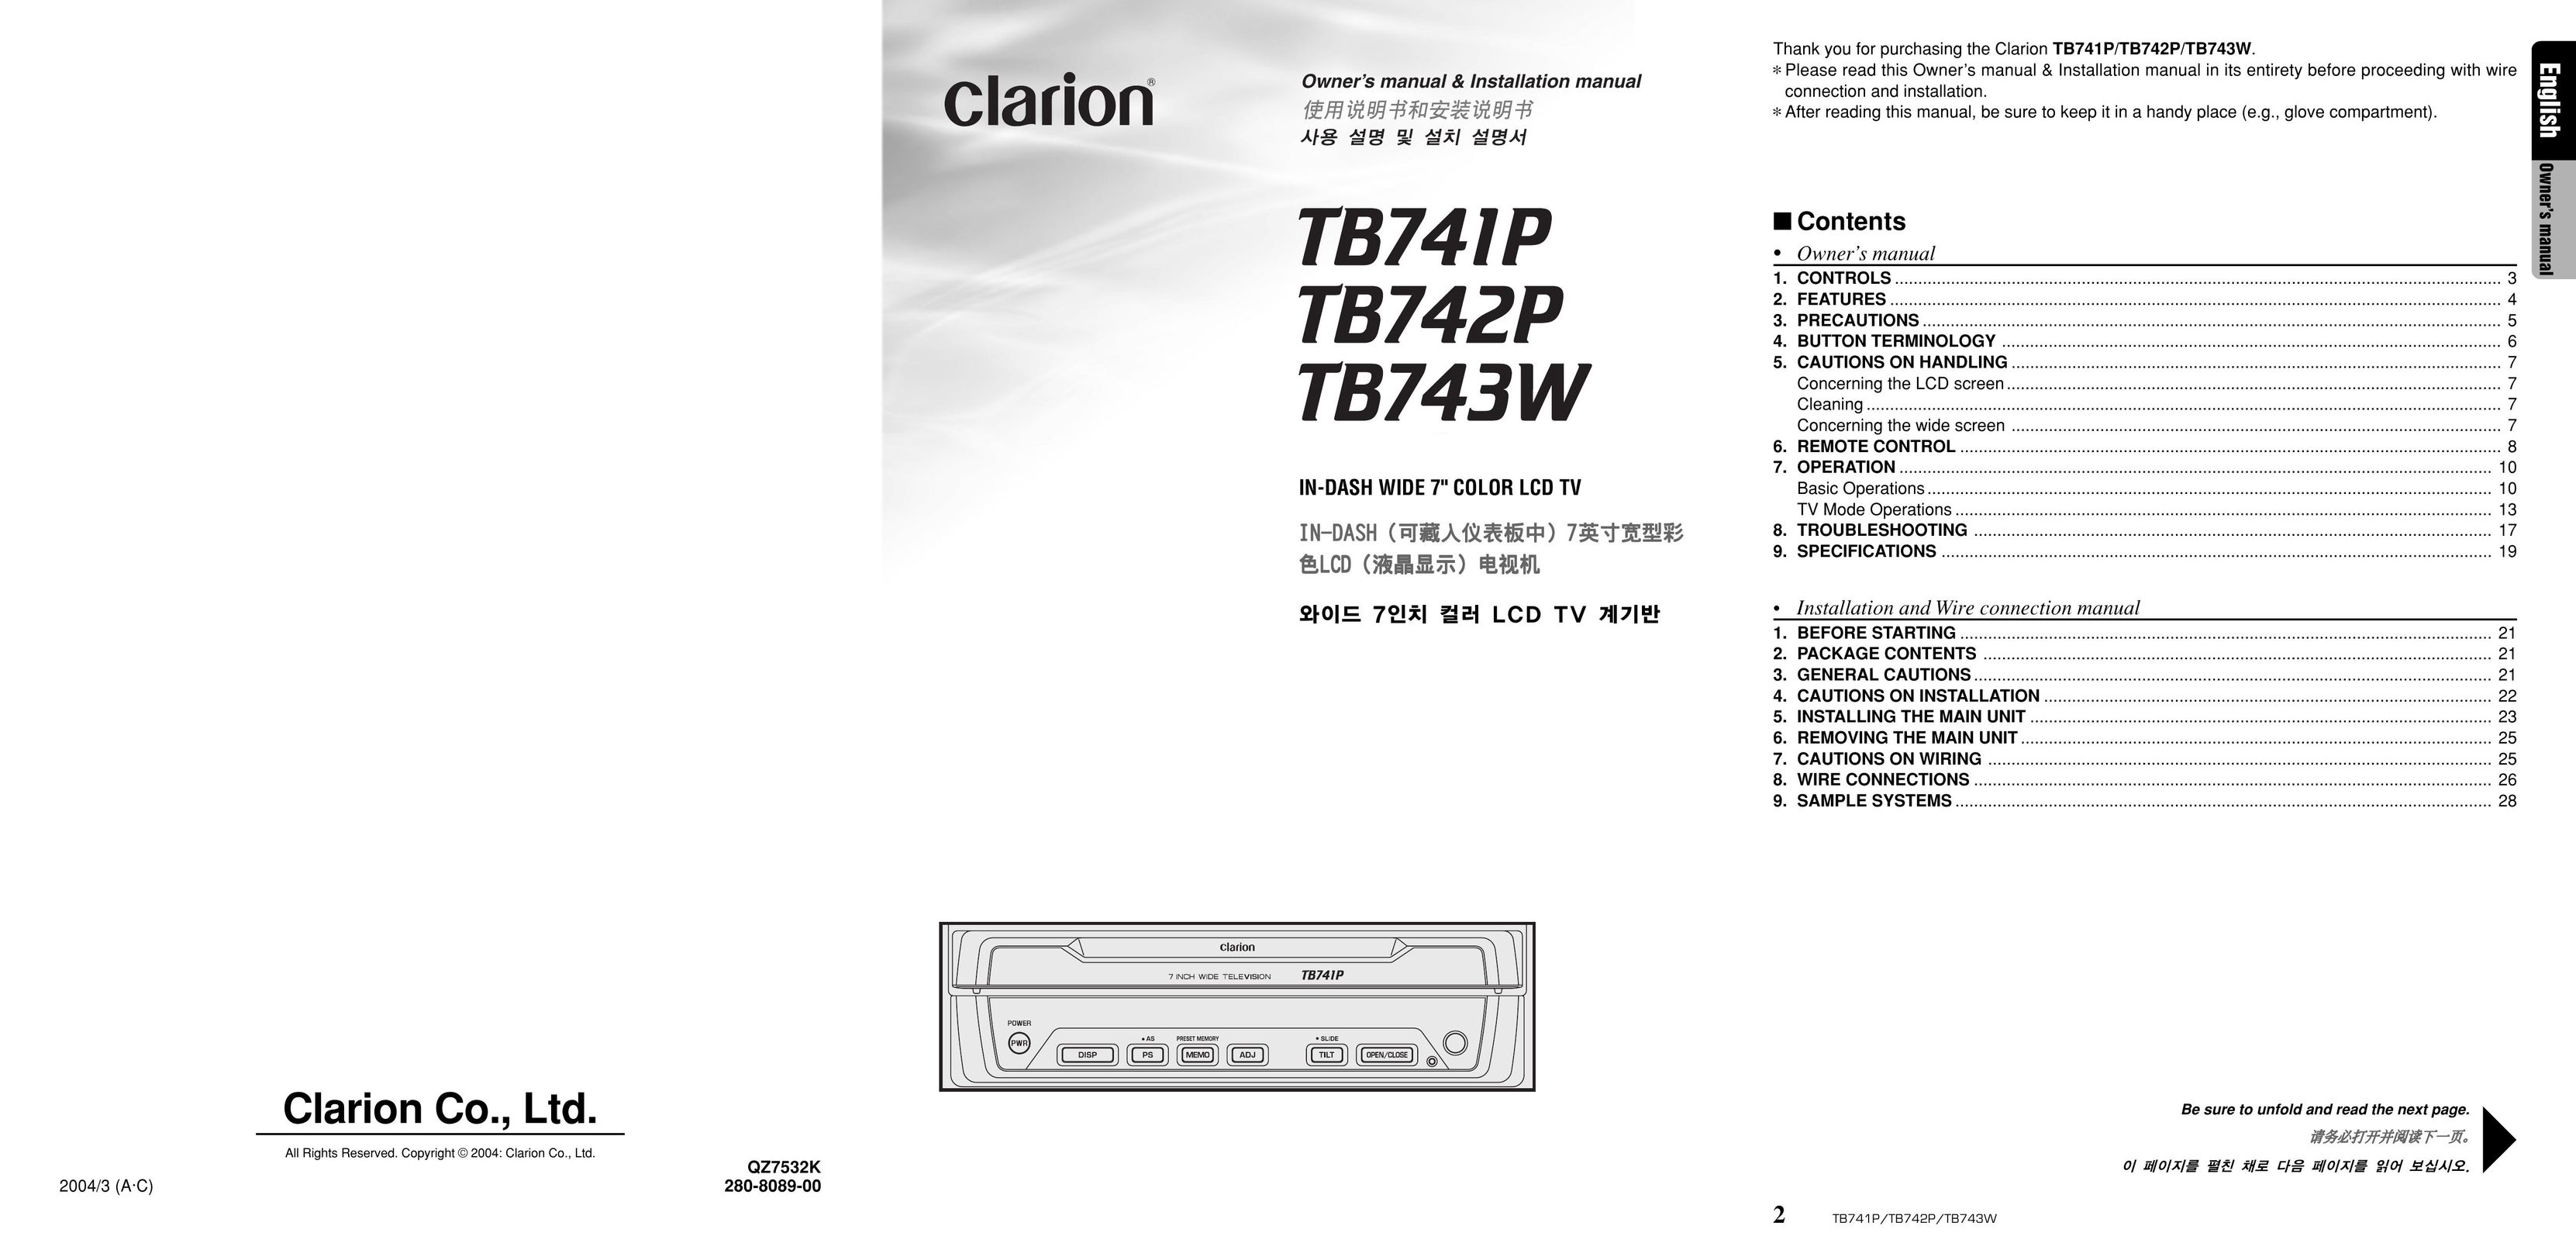 Clarion TB743W Flat Panel Television User Manual